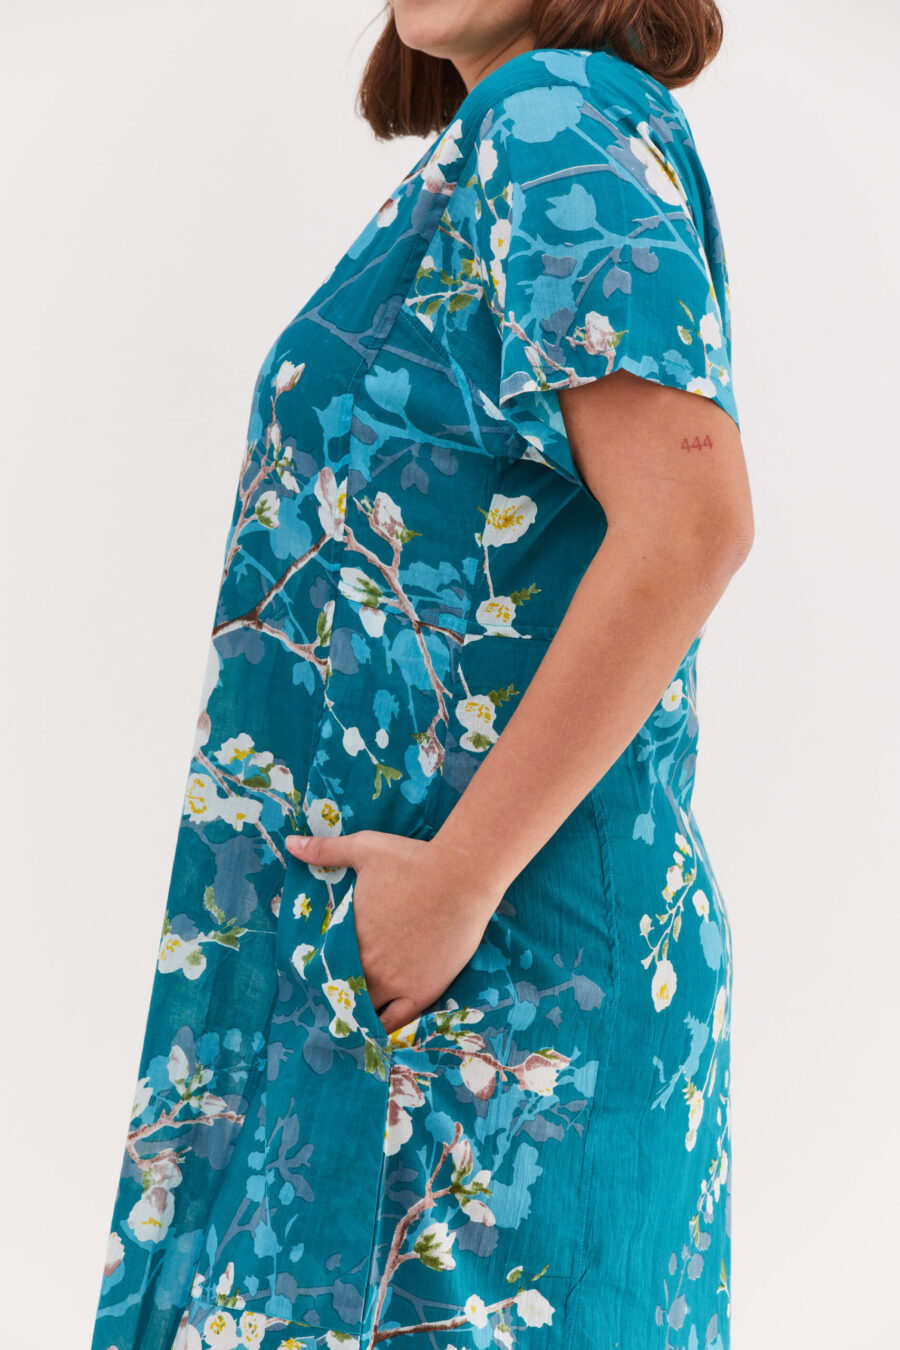 Jalabiya dress | Uniquely designed dress - Blossoming almond print on a blue background. inspired by Vincent Van Gogh by comfort zone boutique